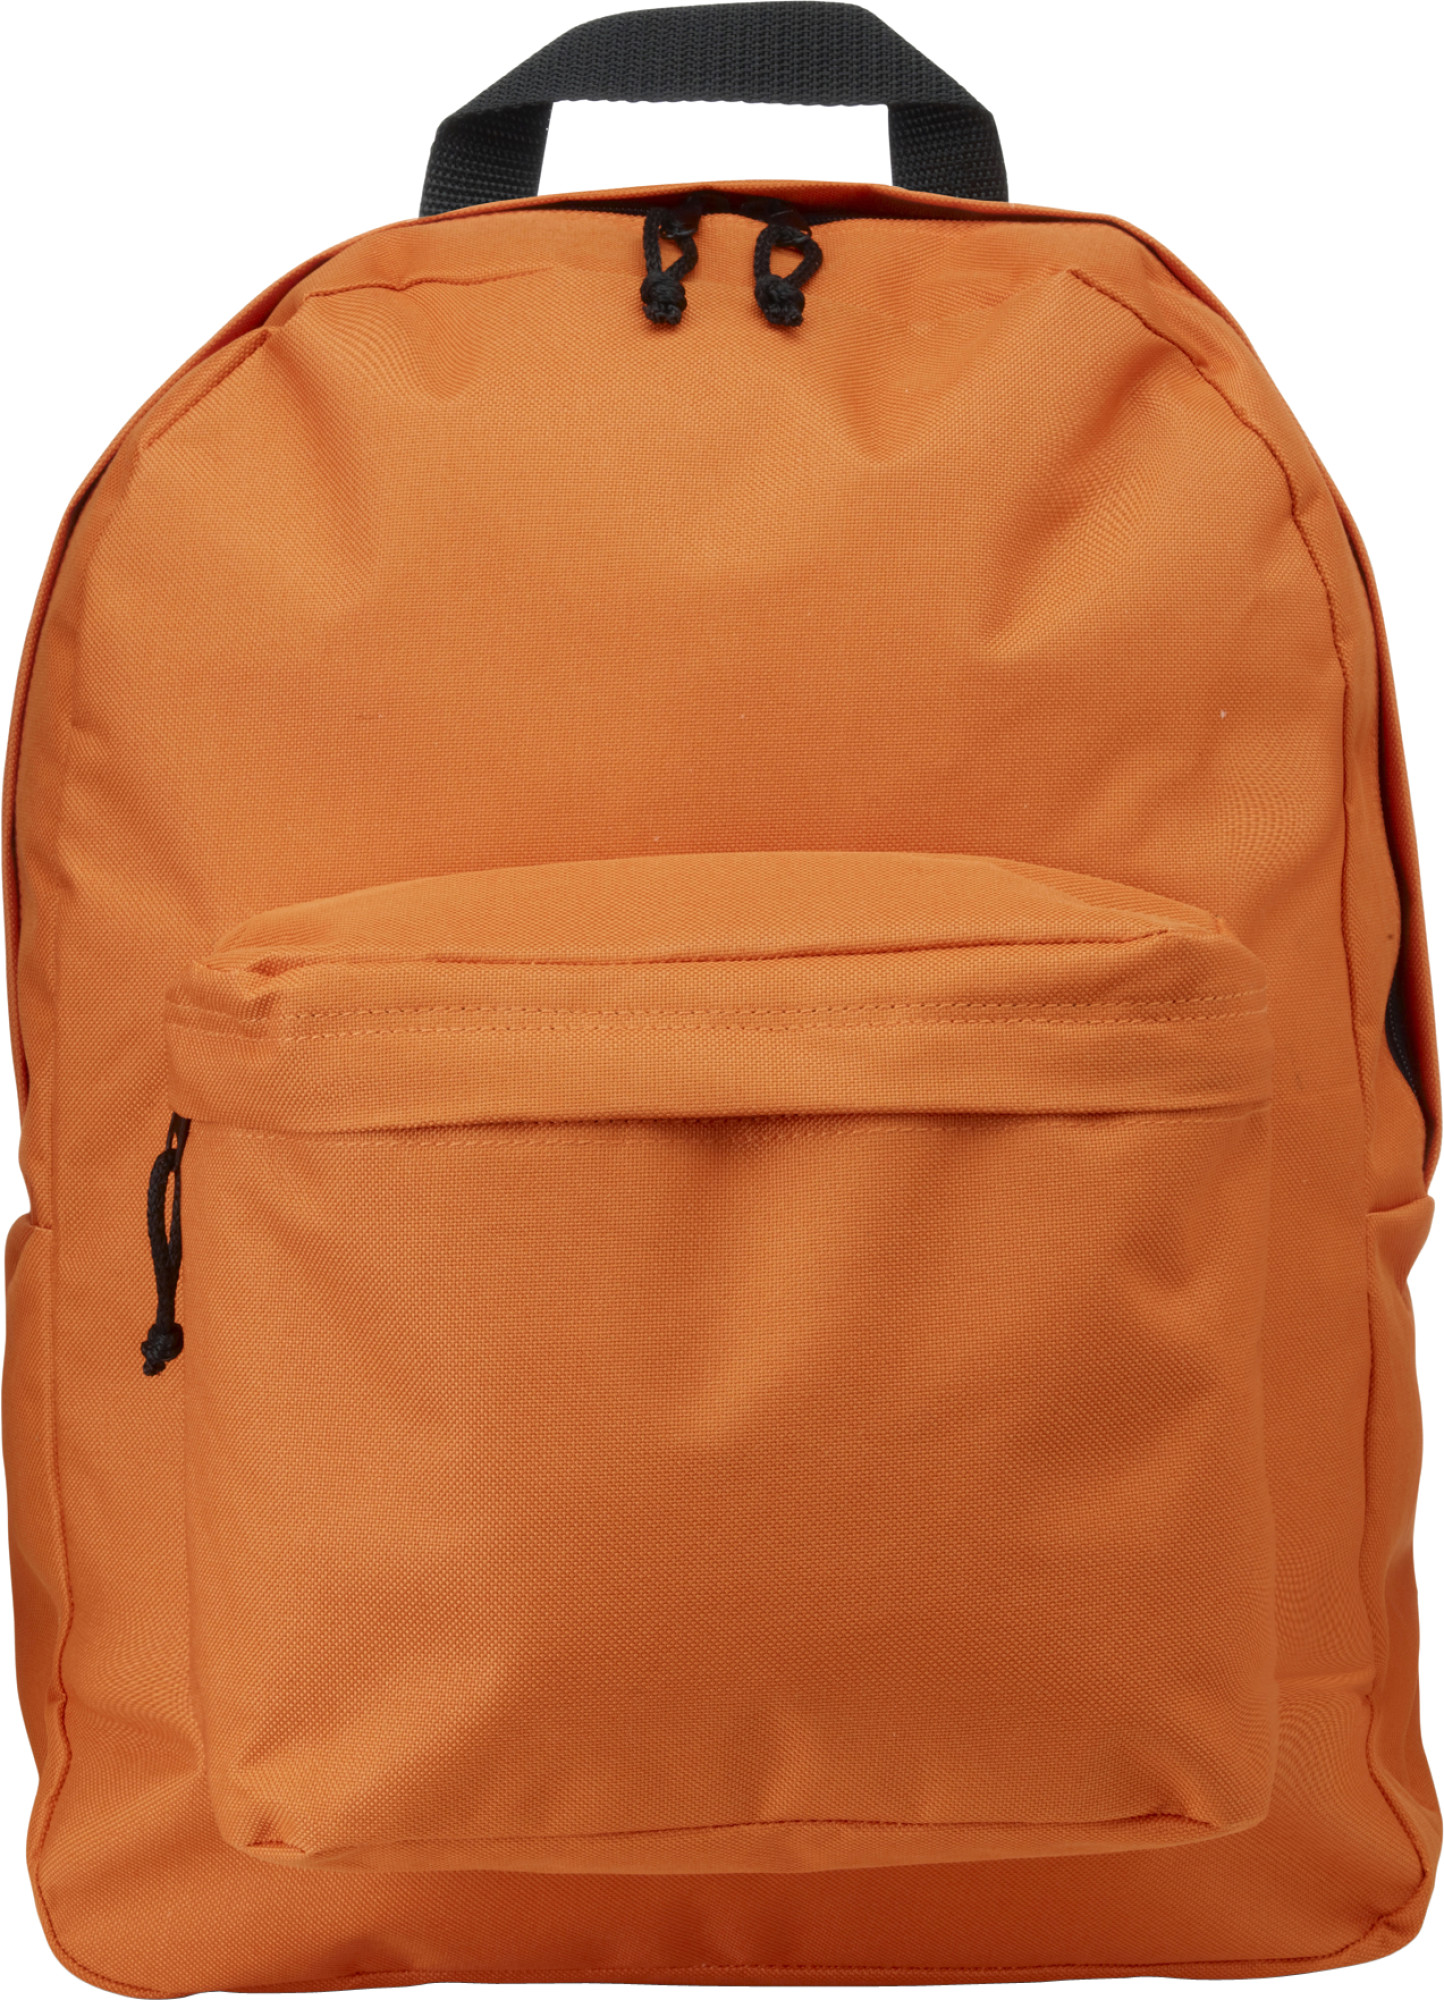 Promotional Polyester backpack